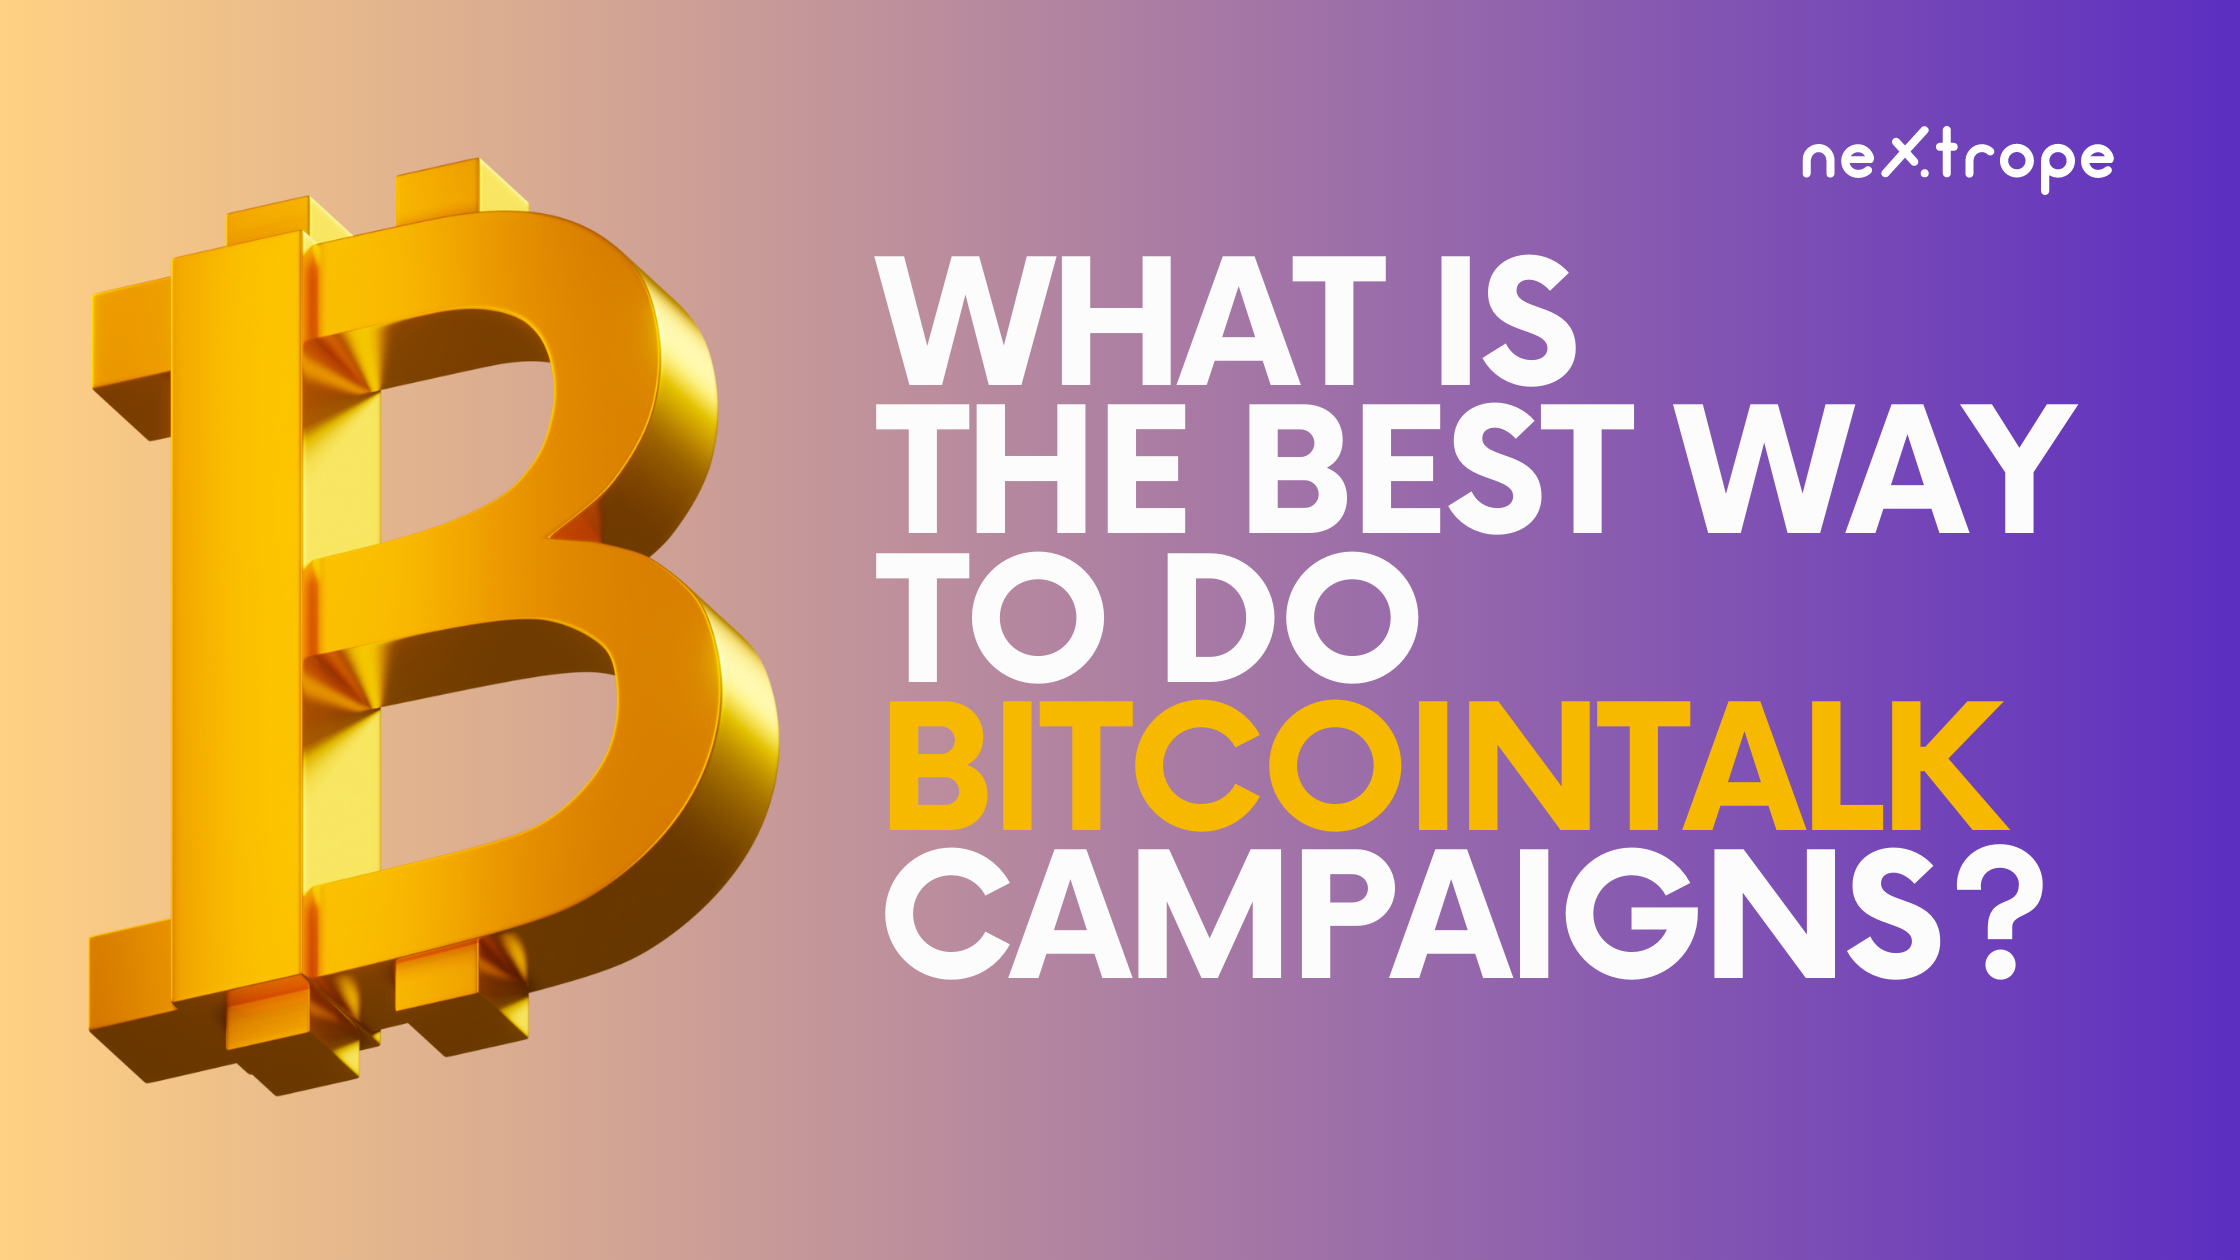 What is the Best Way to do Bitcointalk Campaigns?